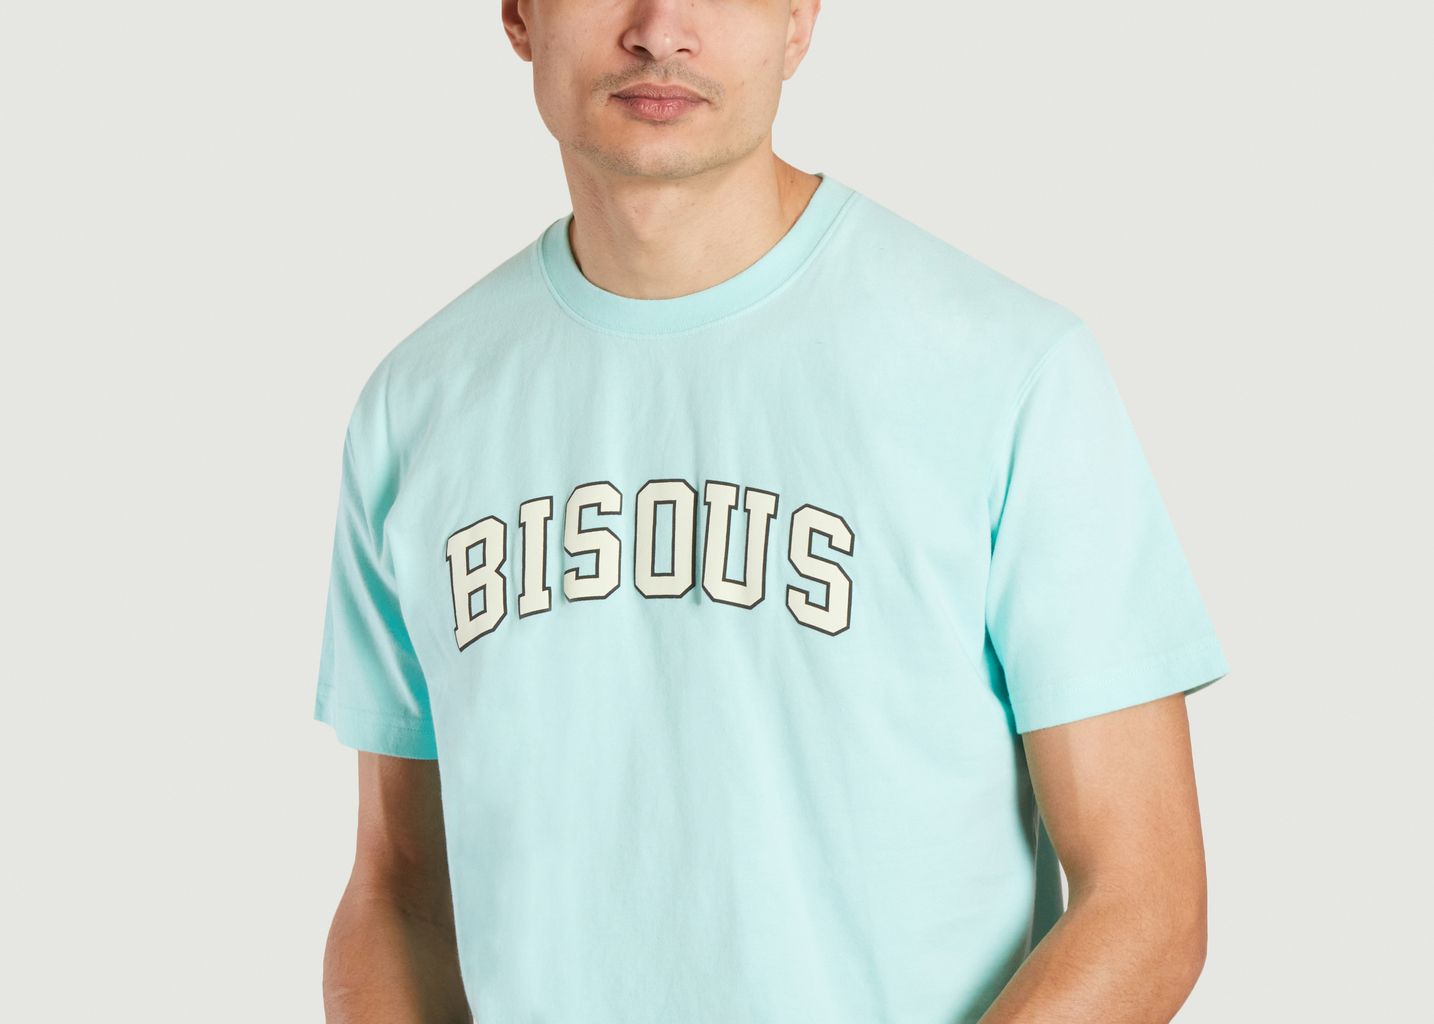 T-shirt College - Bisous Skateboards